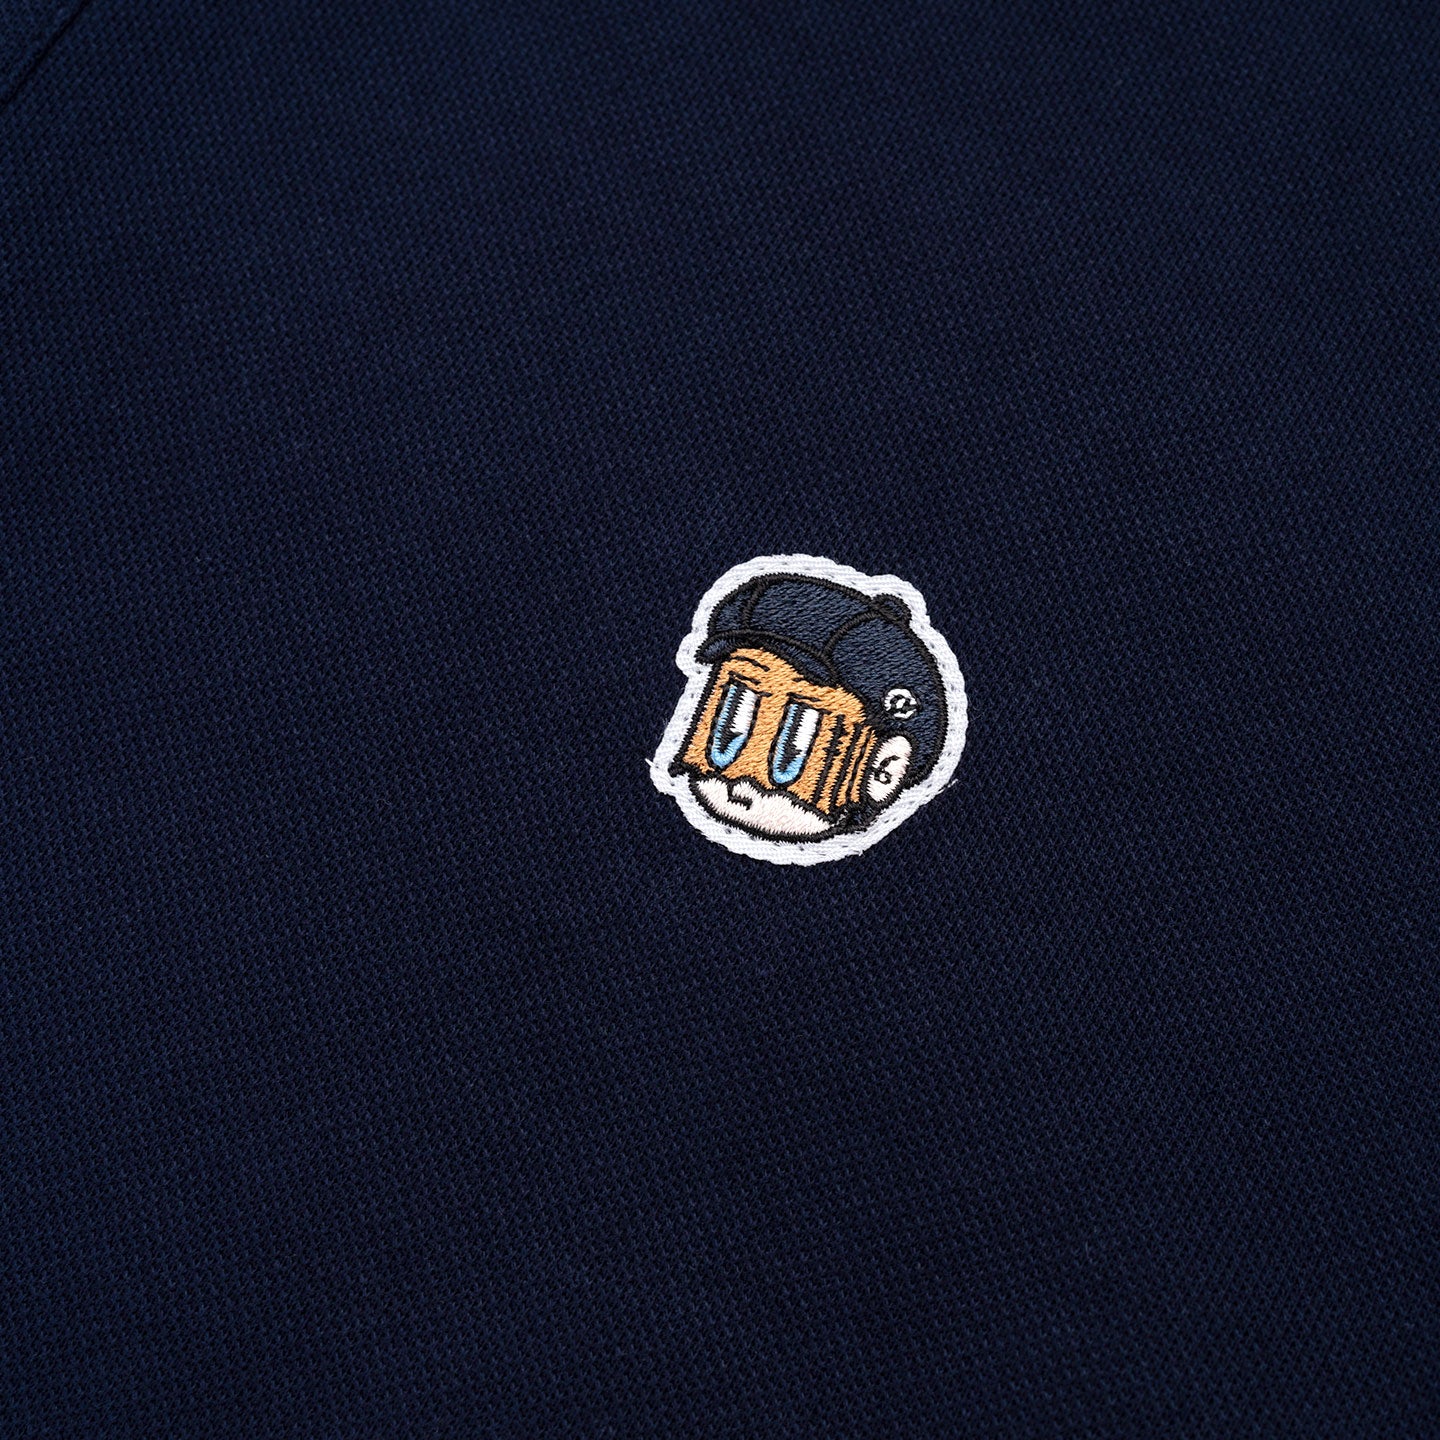 Patched Polo Tee - Navy Blue